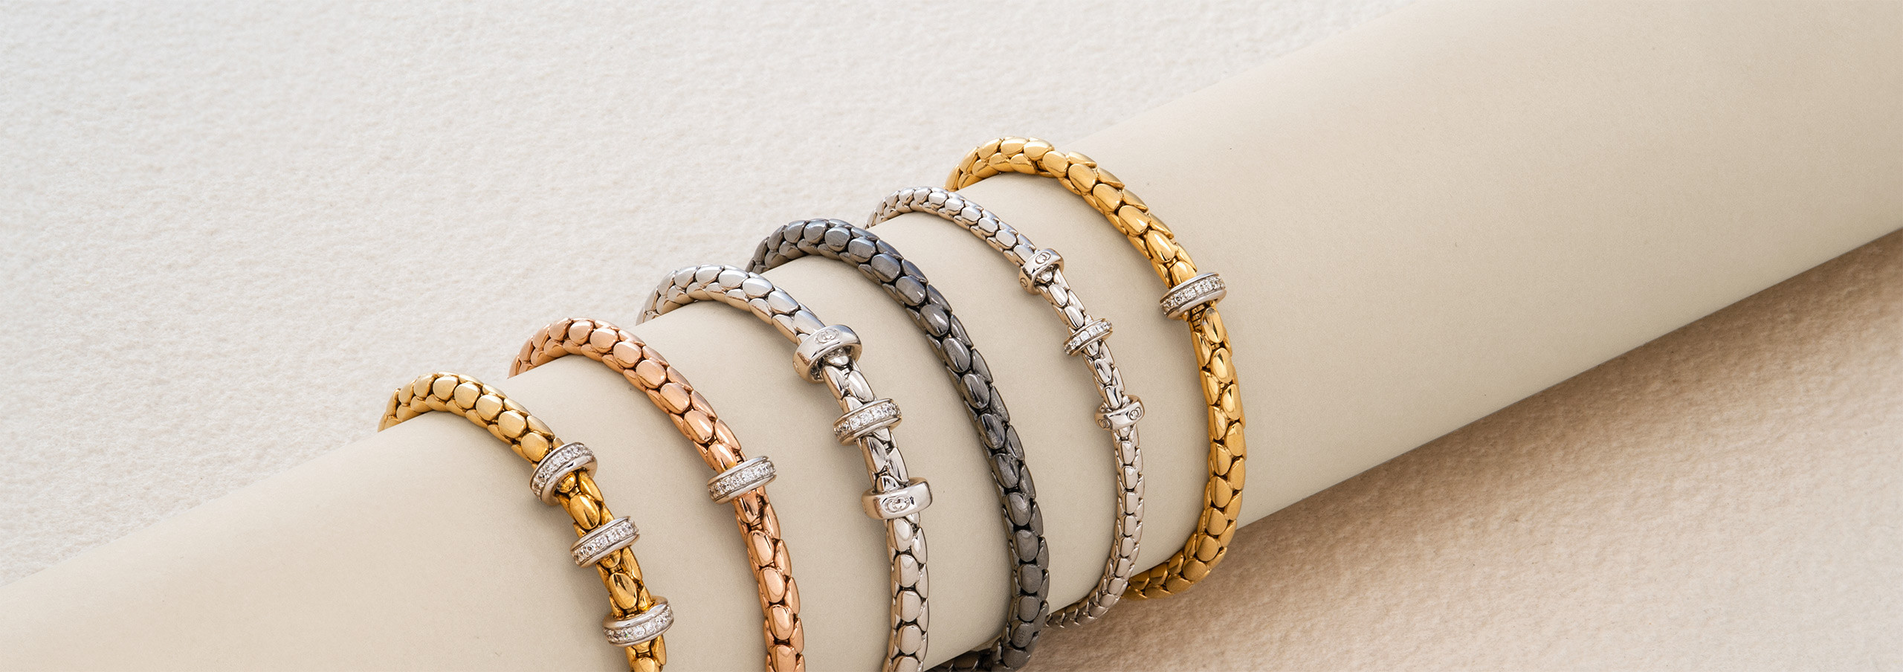 Chimento Stretch Collection made of 18k gold and diamonds banner Image